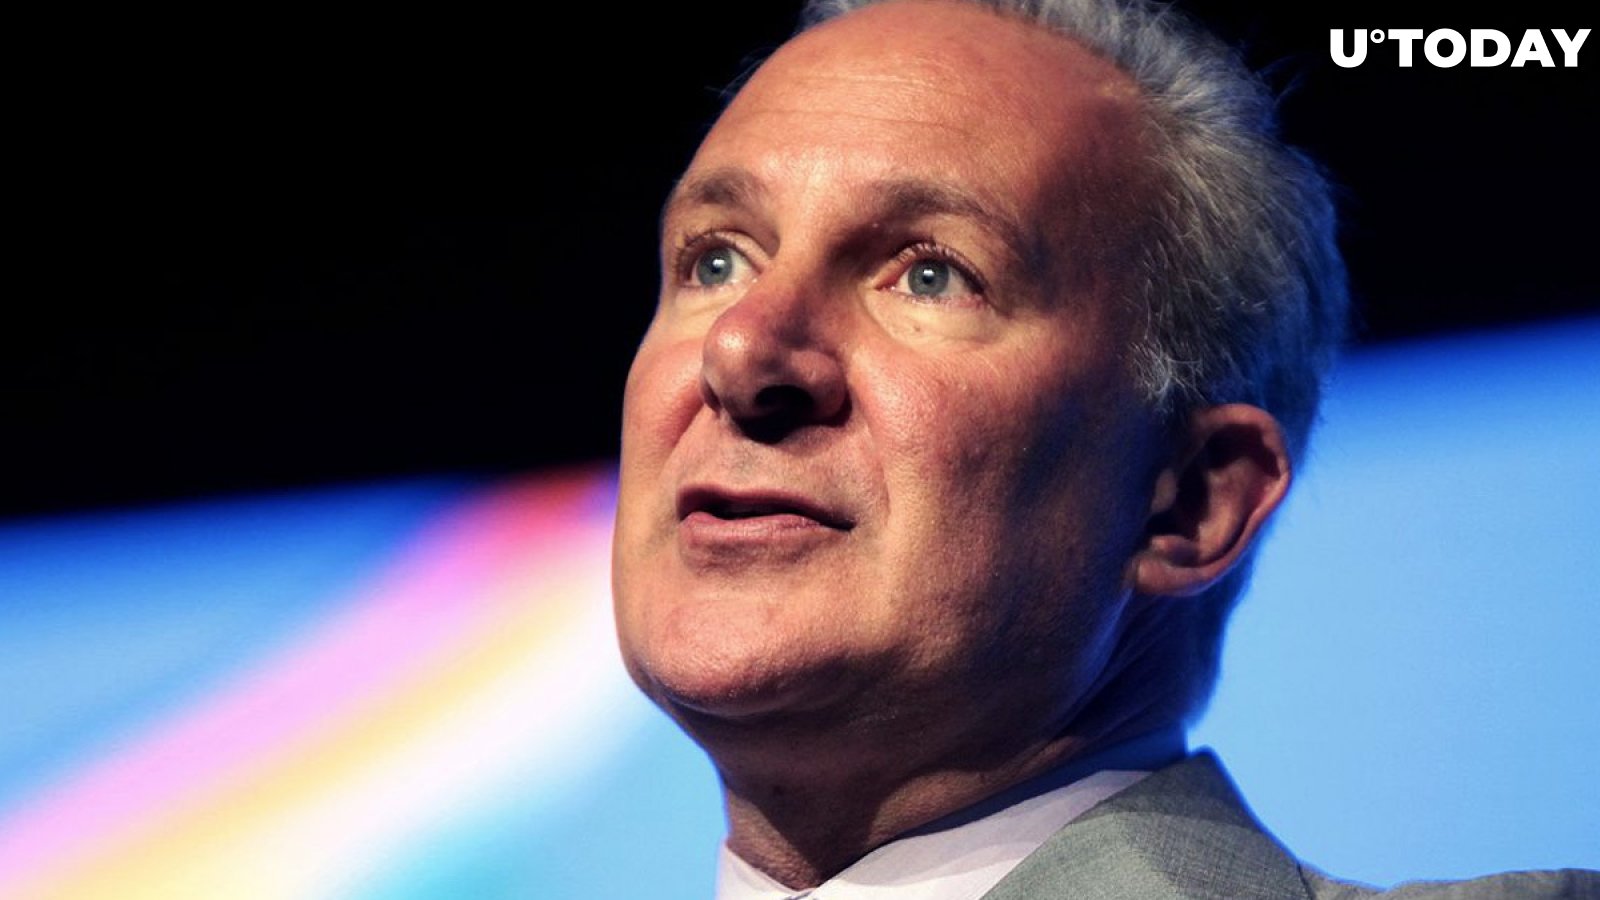 Being Able to Buy Things With Bitcoin Is Lie: Peter Schiff